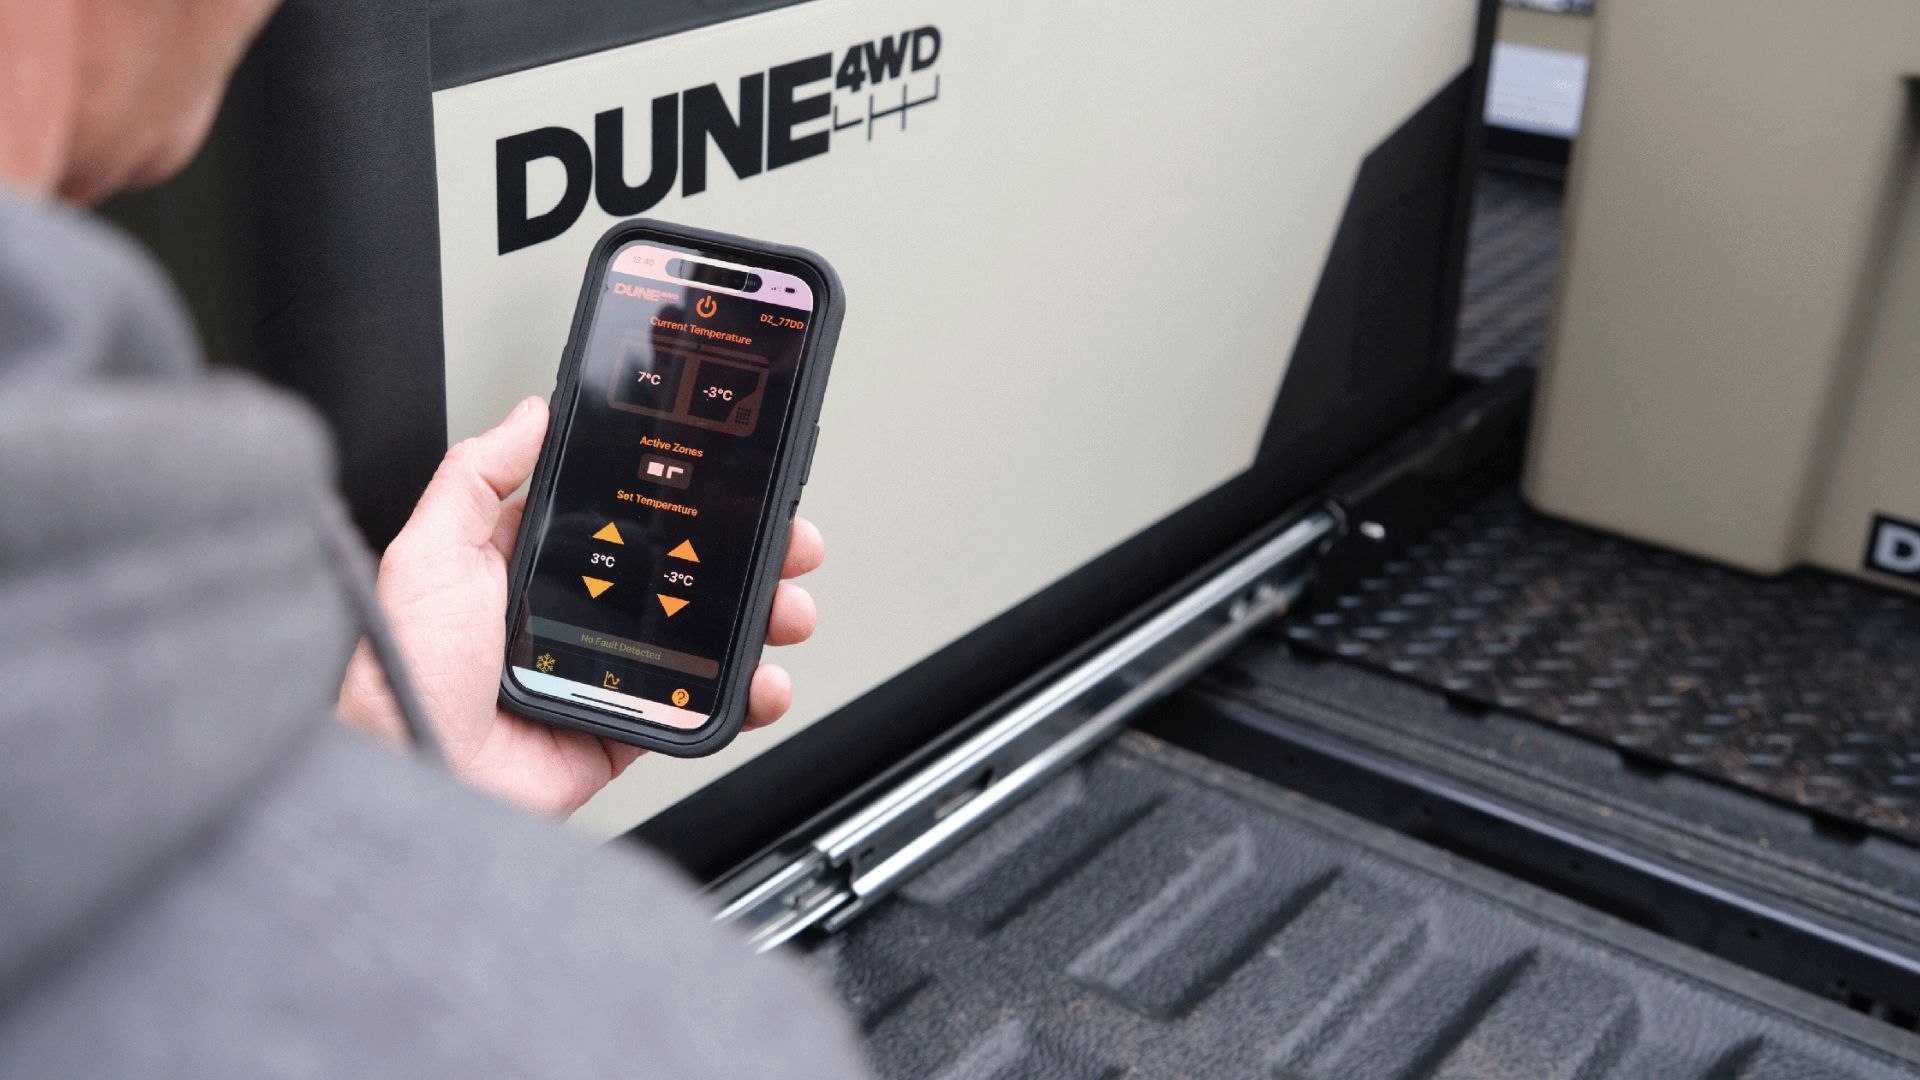 The new Dune 4WD Fridges are built with durable and lightweight polypropylene